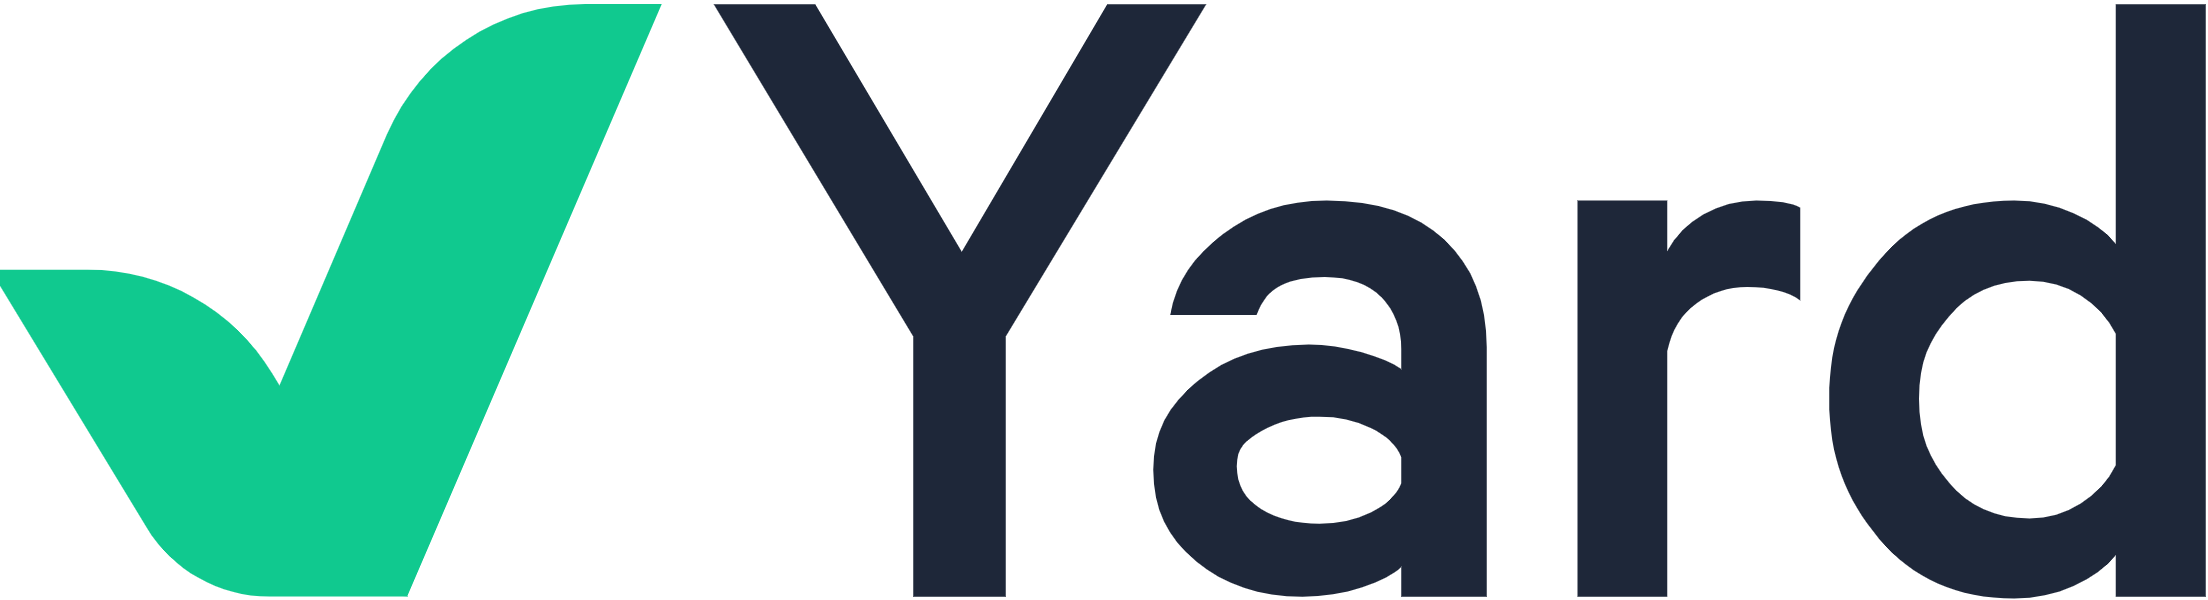 Yard to Compare home loans